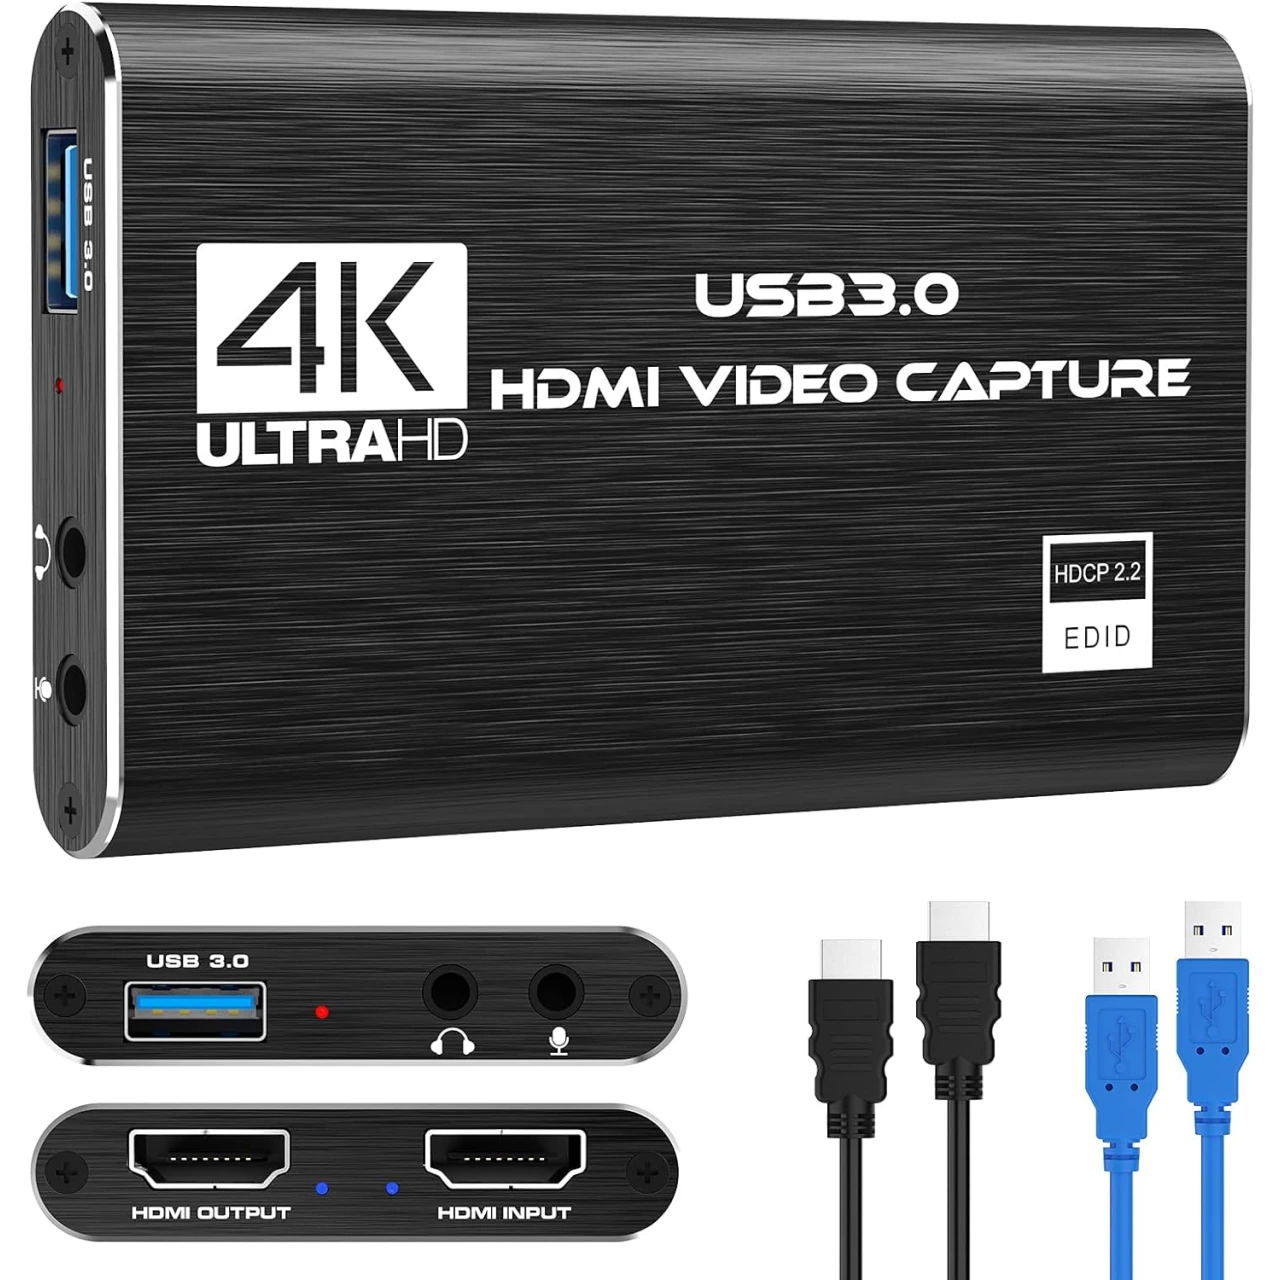 Rybozen 4K Audio Video Capture Card, USB 3.0 HDMI Video Capture Device, Full HD 1080P for Game Recording, Live Streaming Broadcasting